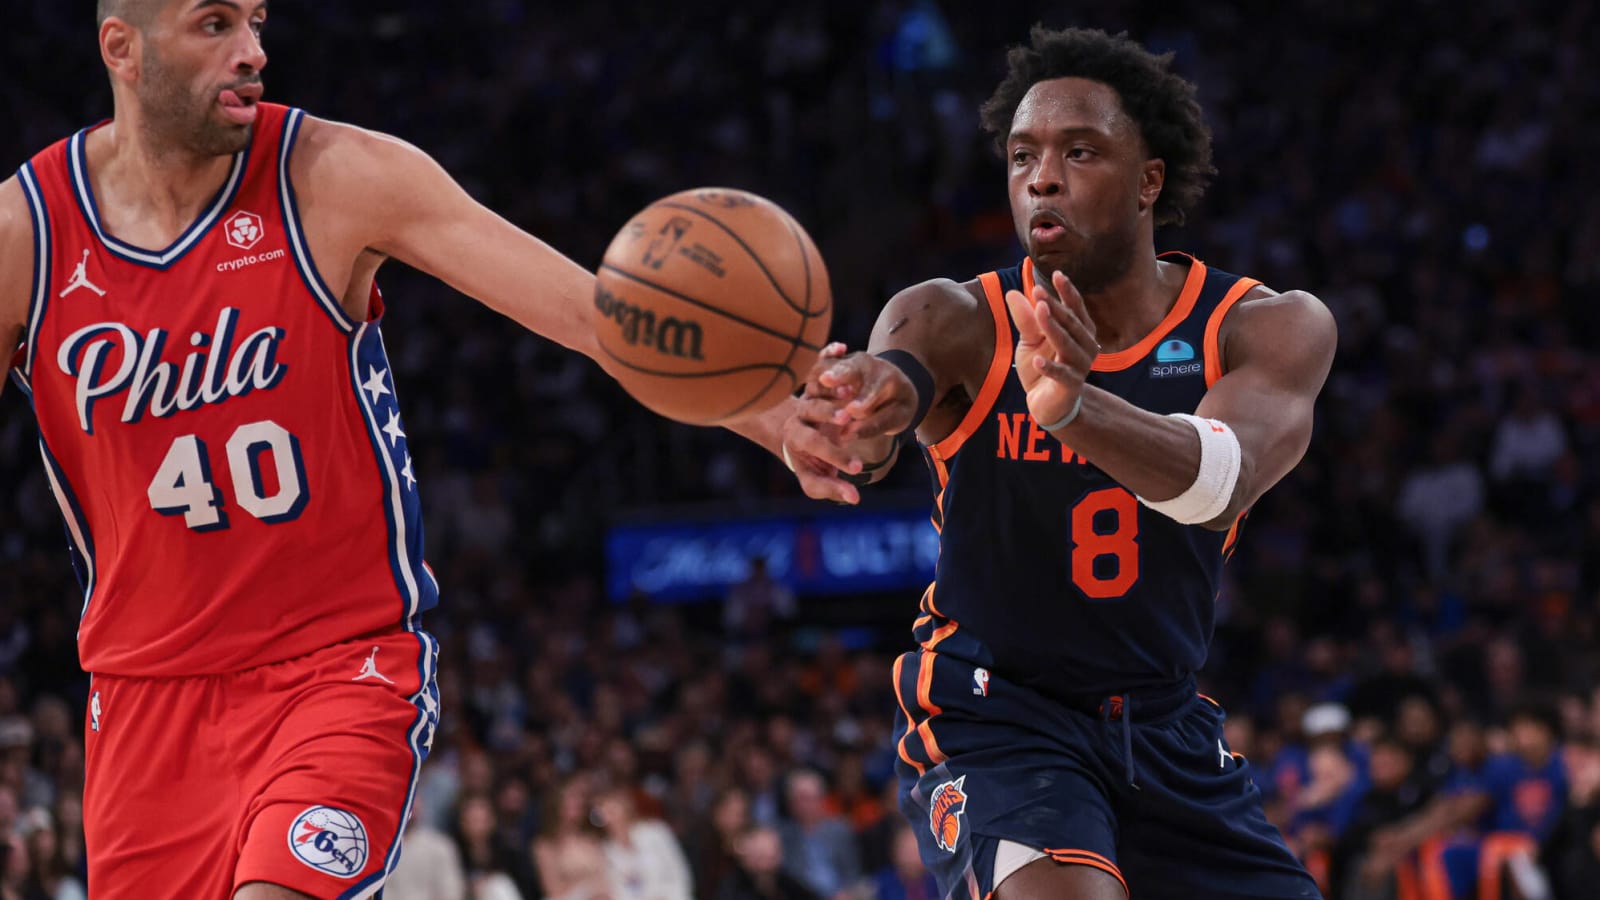 Knicks’ OG Anunoby was a catalyst to series victory over the 76ers